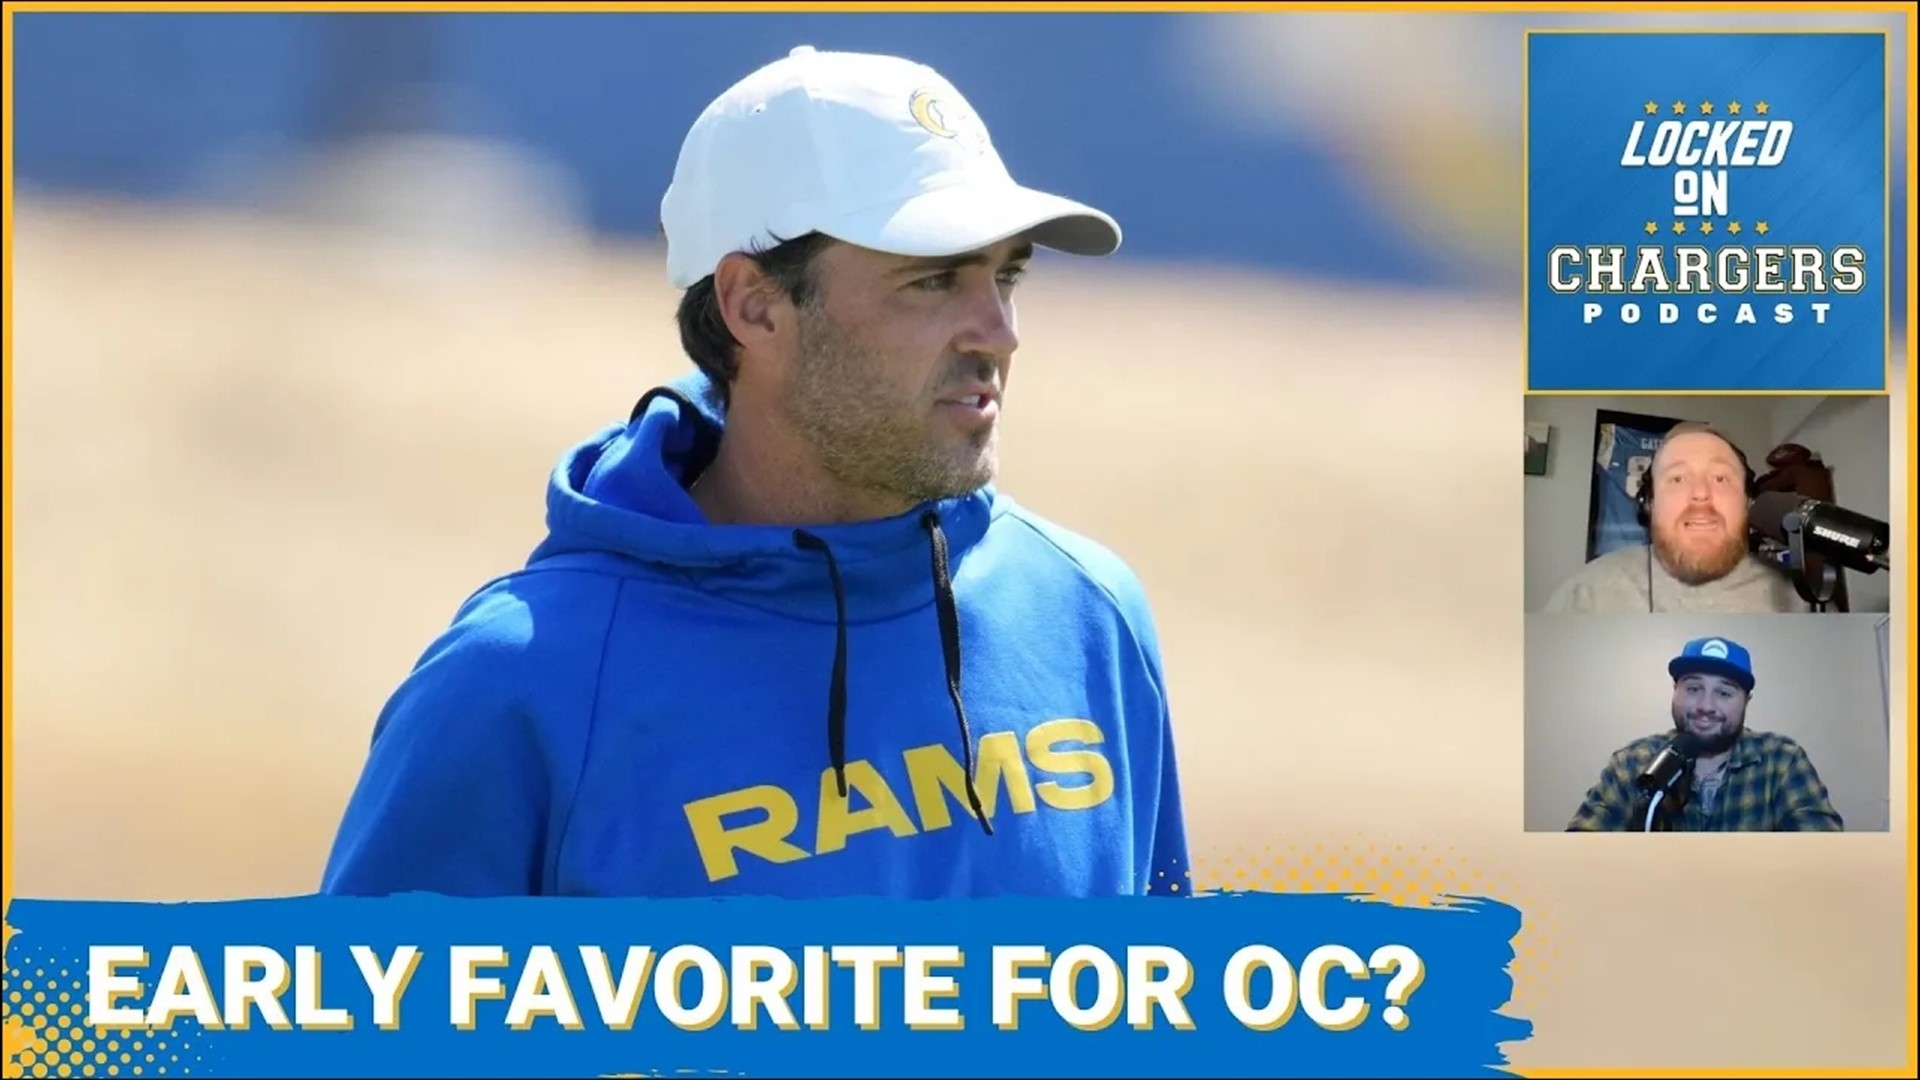 The Chargers have now officially started interviewing new offensive coordinators, and Rams QB coach Zac Robinson seems to make the most sense of the early candidates